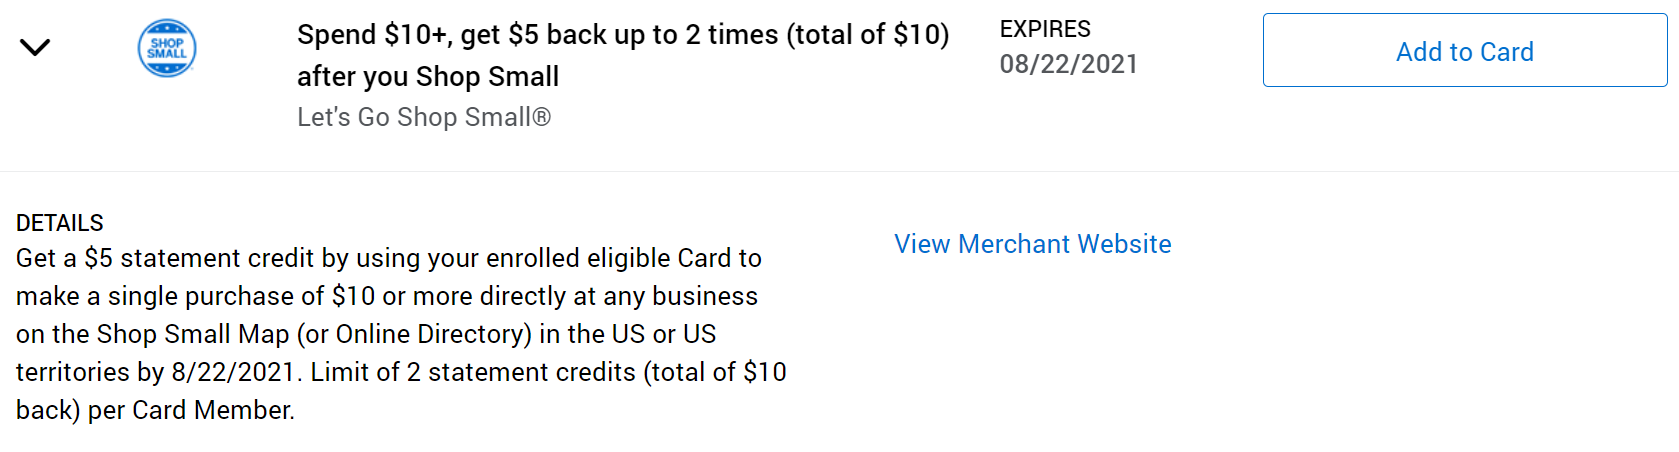 Shop Small Amex Offer